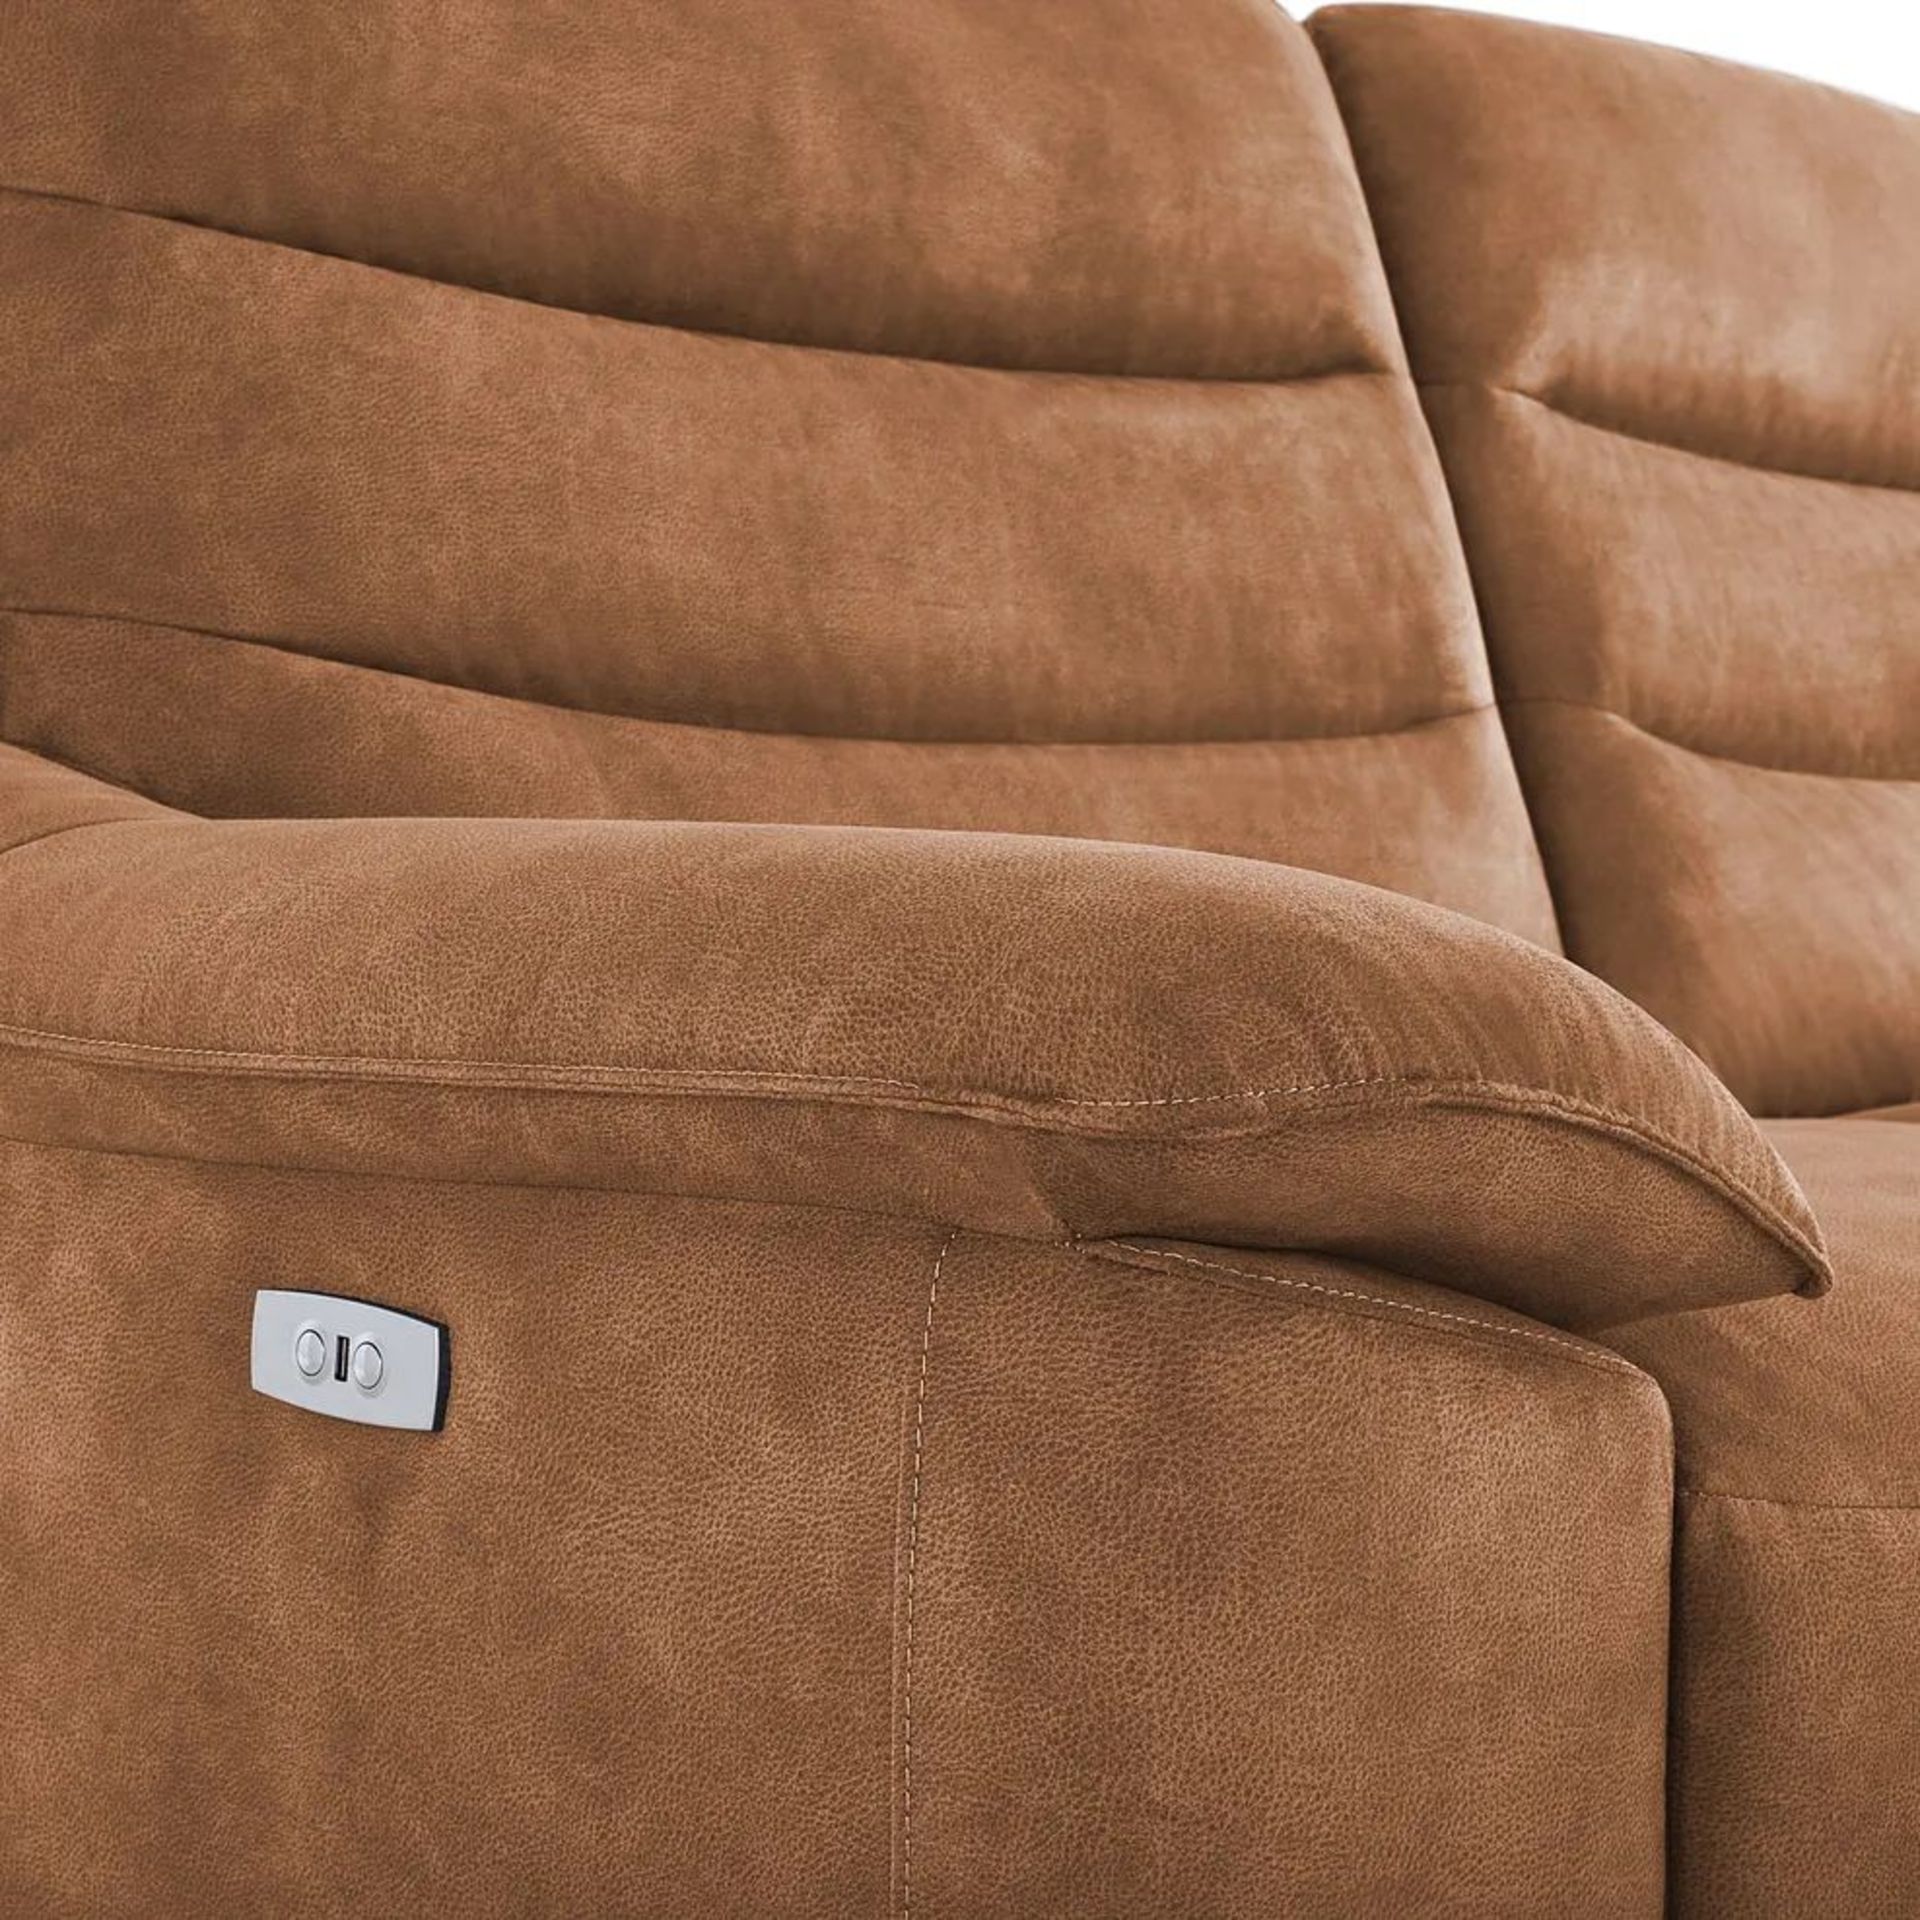 BRAND NEW CARTER 3 Seater Electric Recliner Sofa - BROWN FABRIC. RRP £1299. Shown here in Ranch - Image 11 of 12